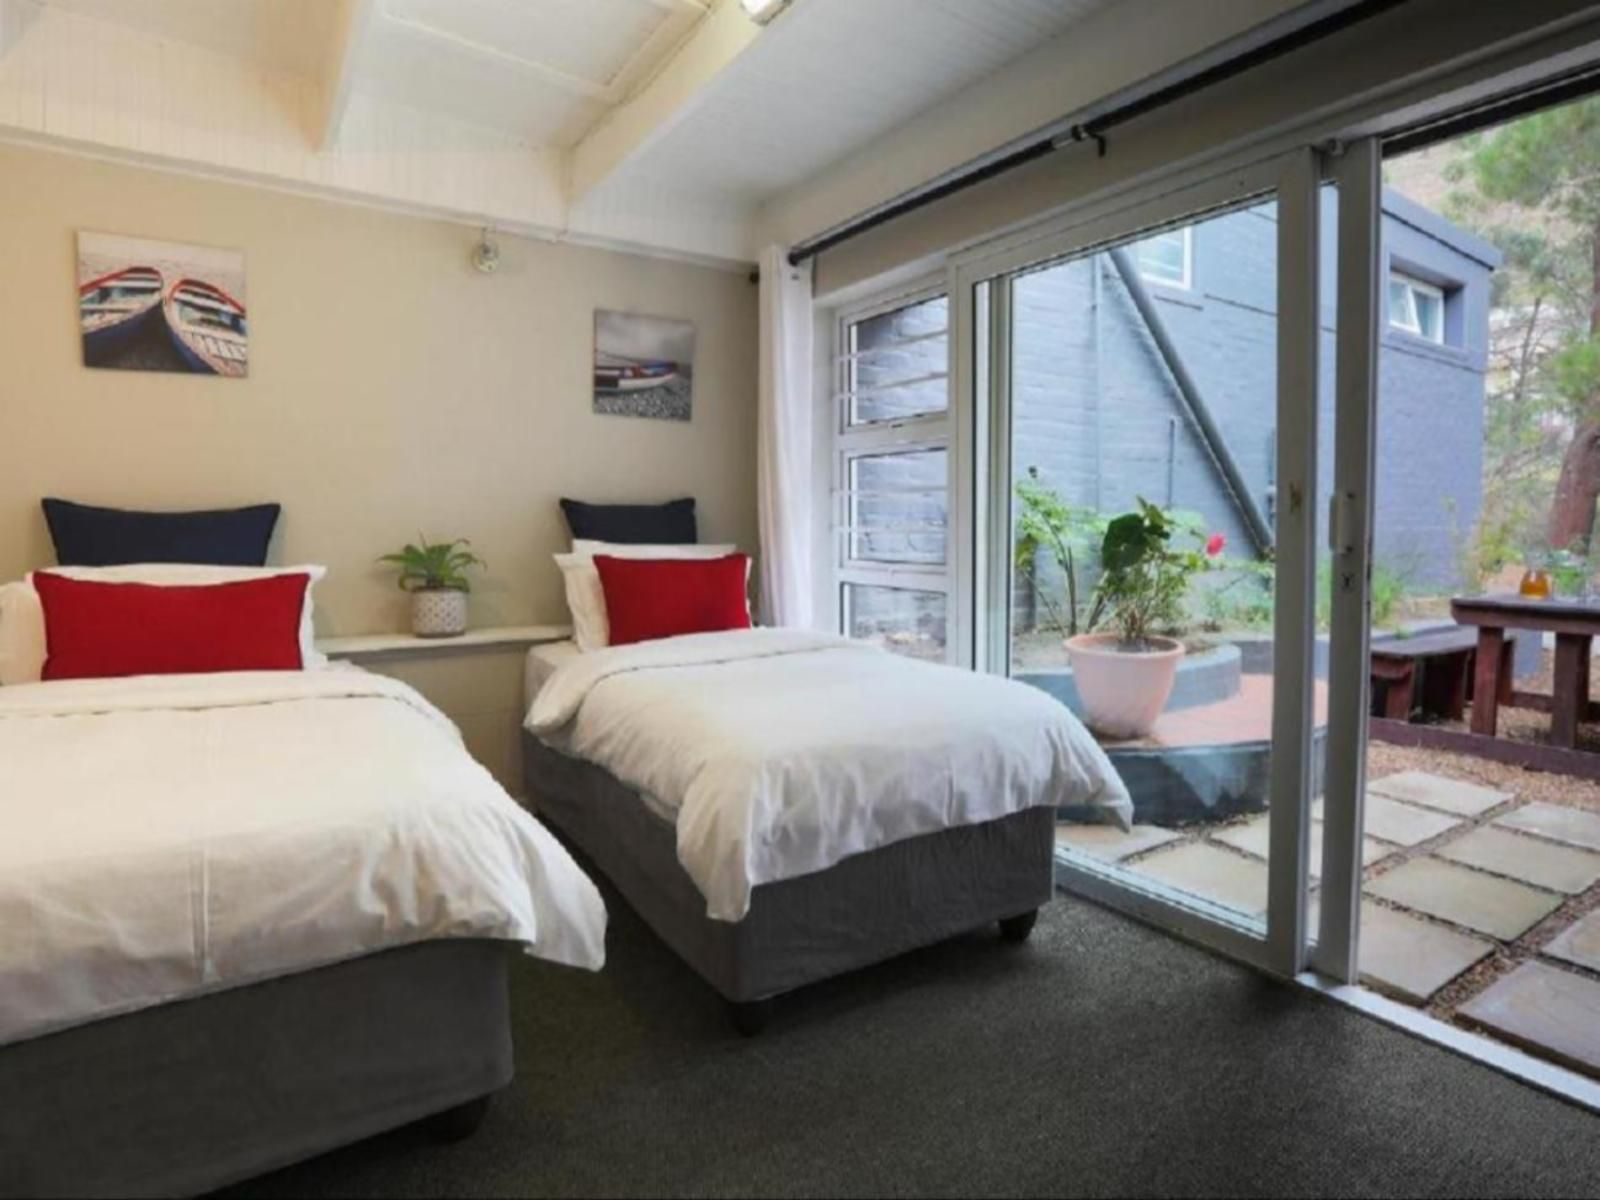 View Lodge Mansfield Gordons Bay Western Cape South Africa Window, Architecture, Bedroom